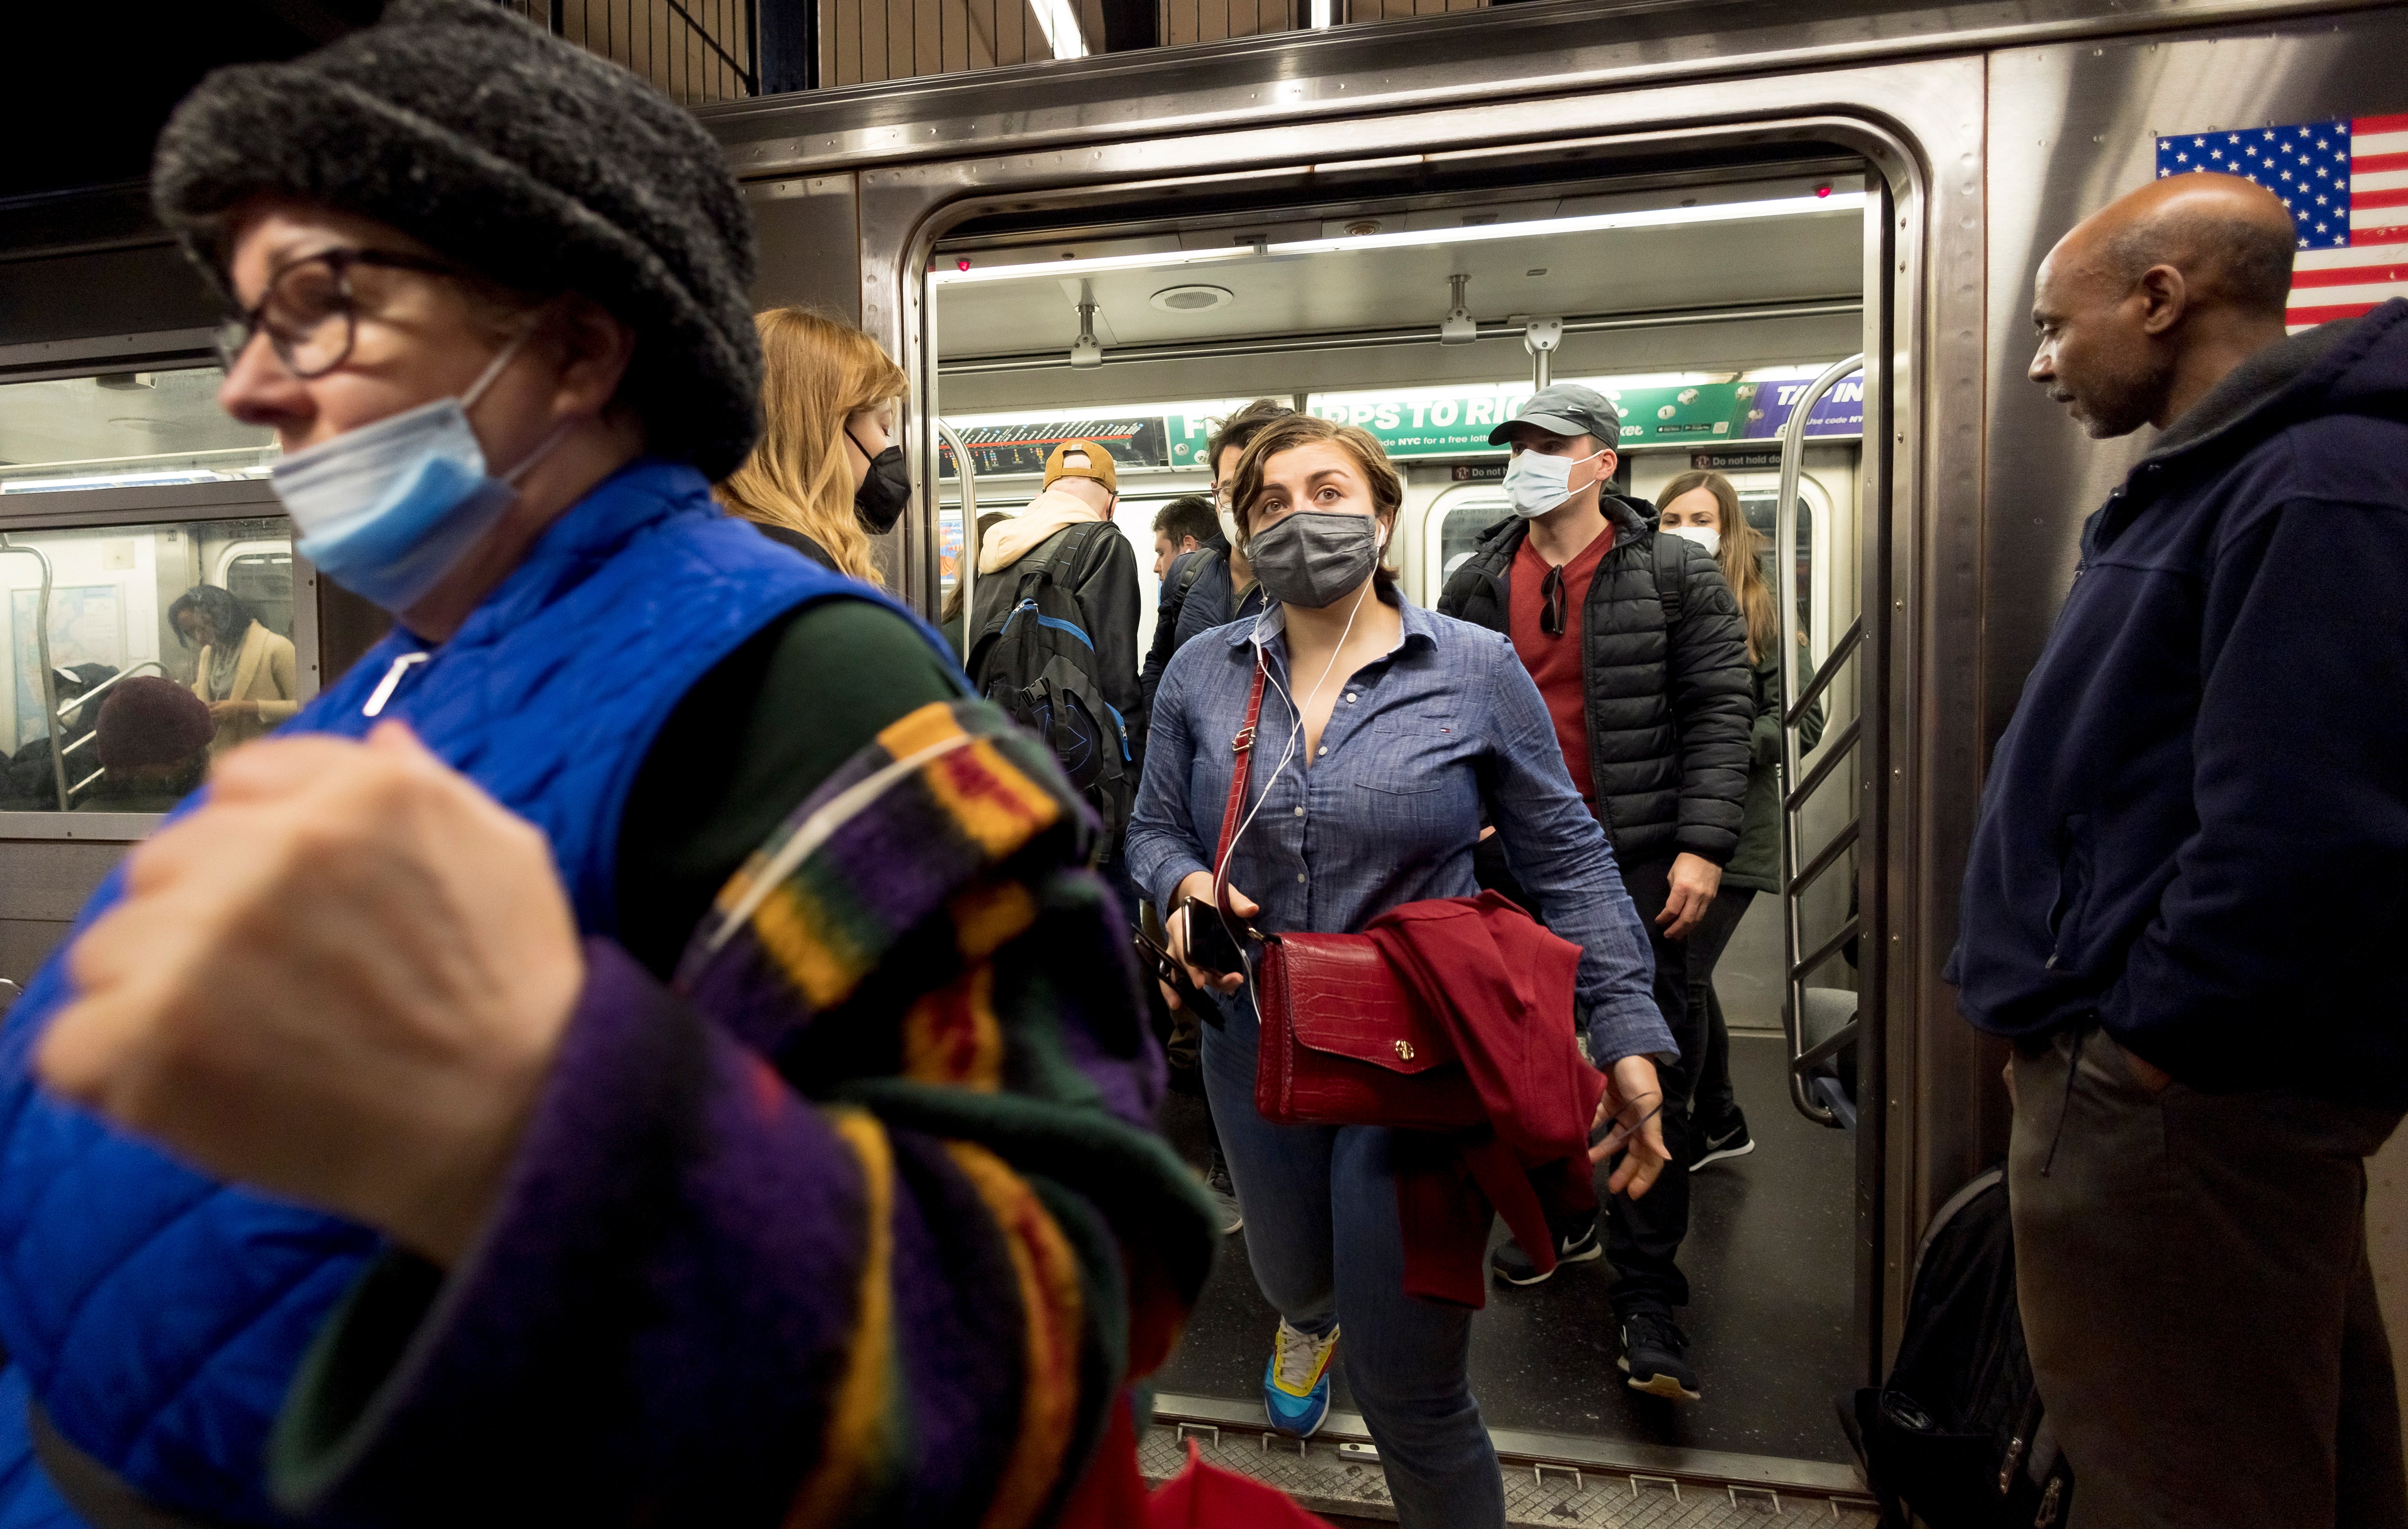 People enter and exit a New York City subway car in New York, New York, USA, 21 April 2022